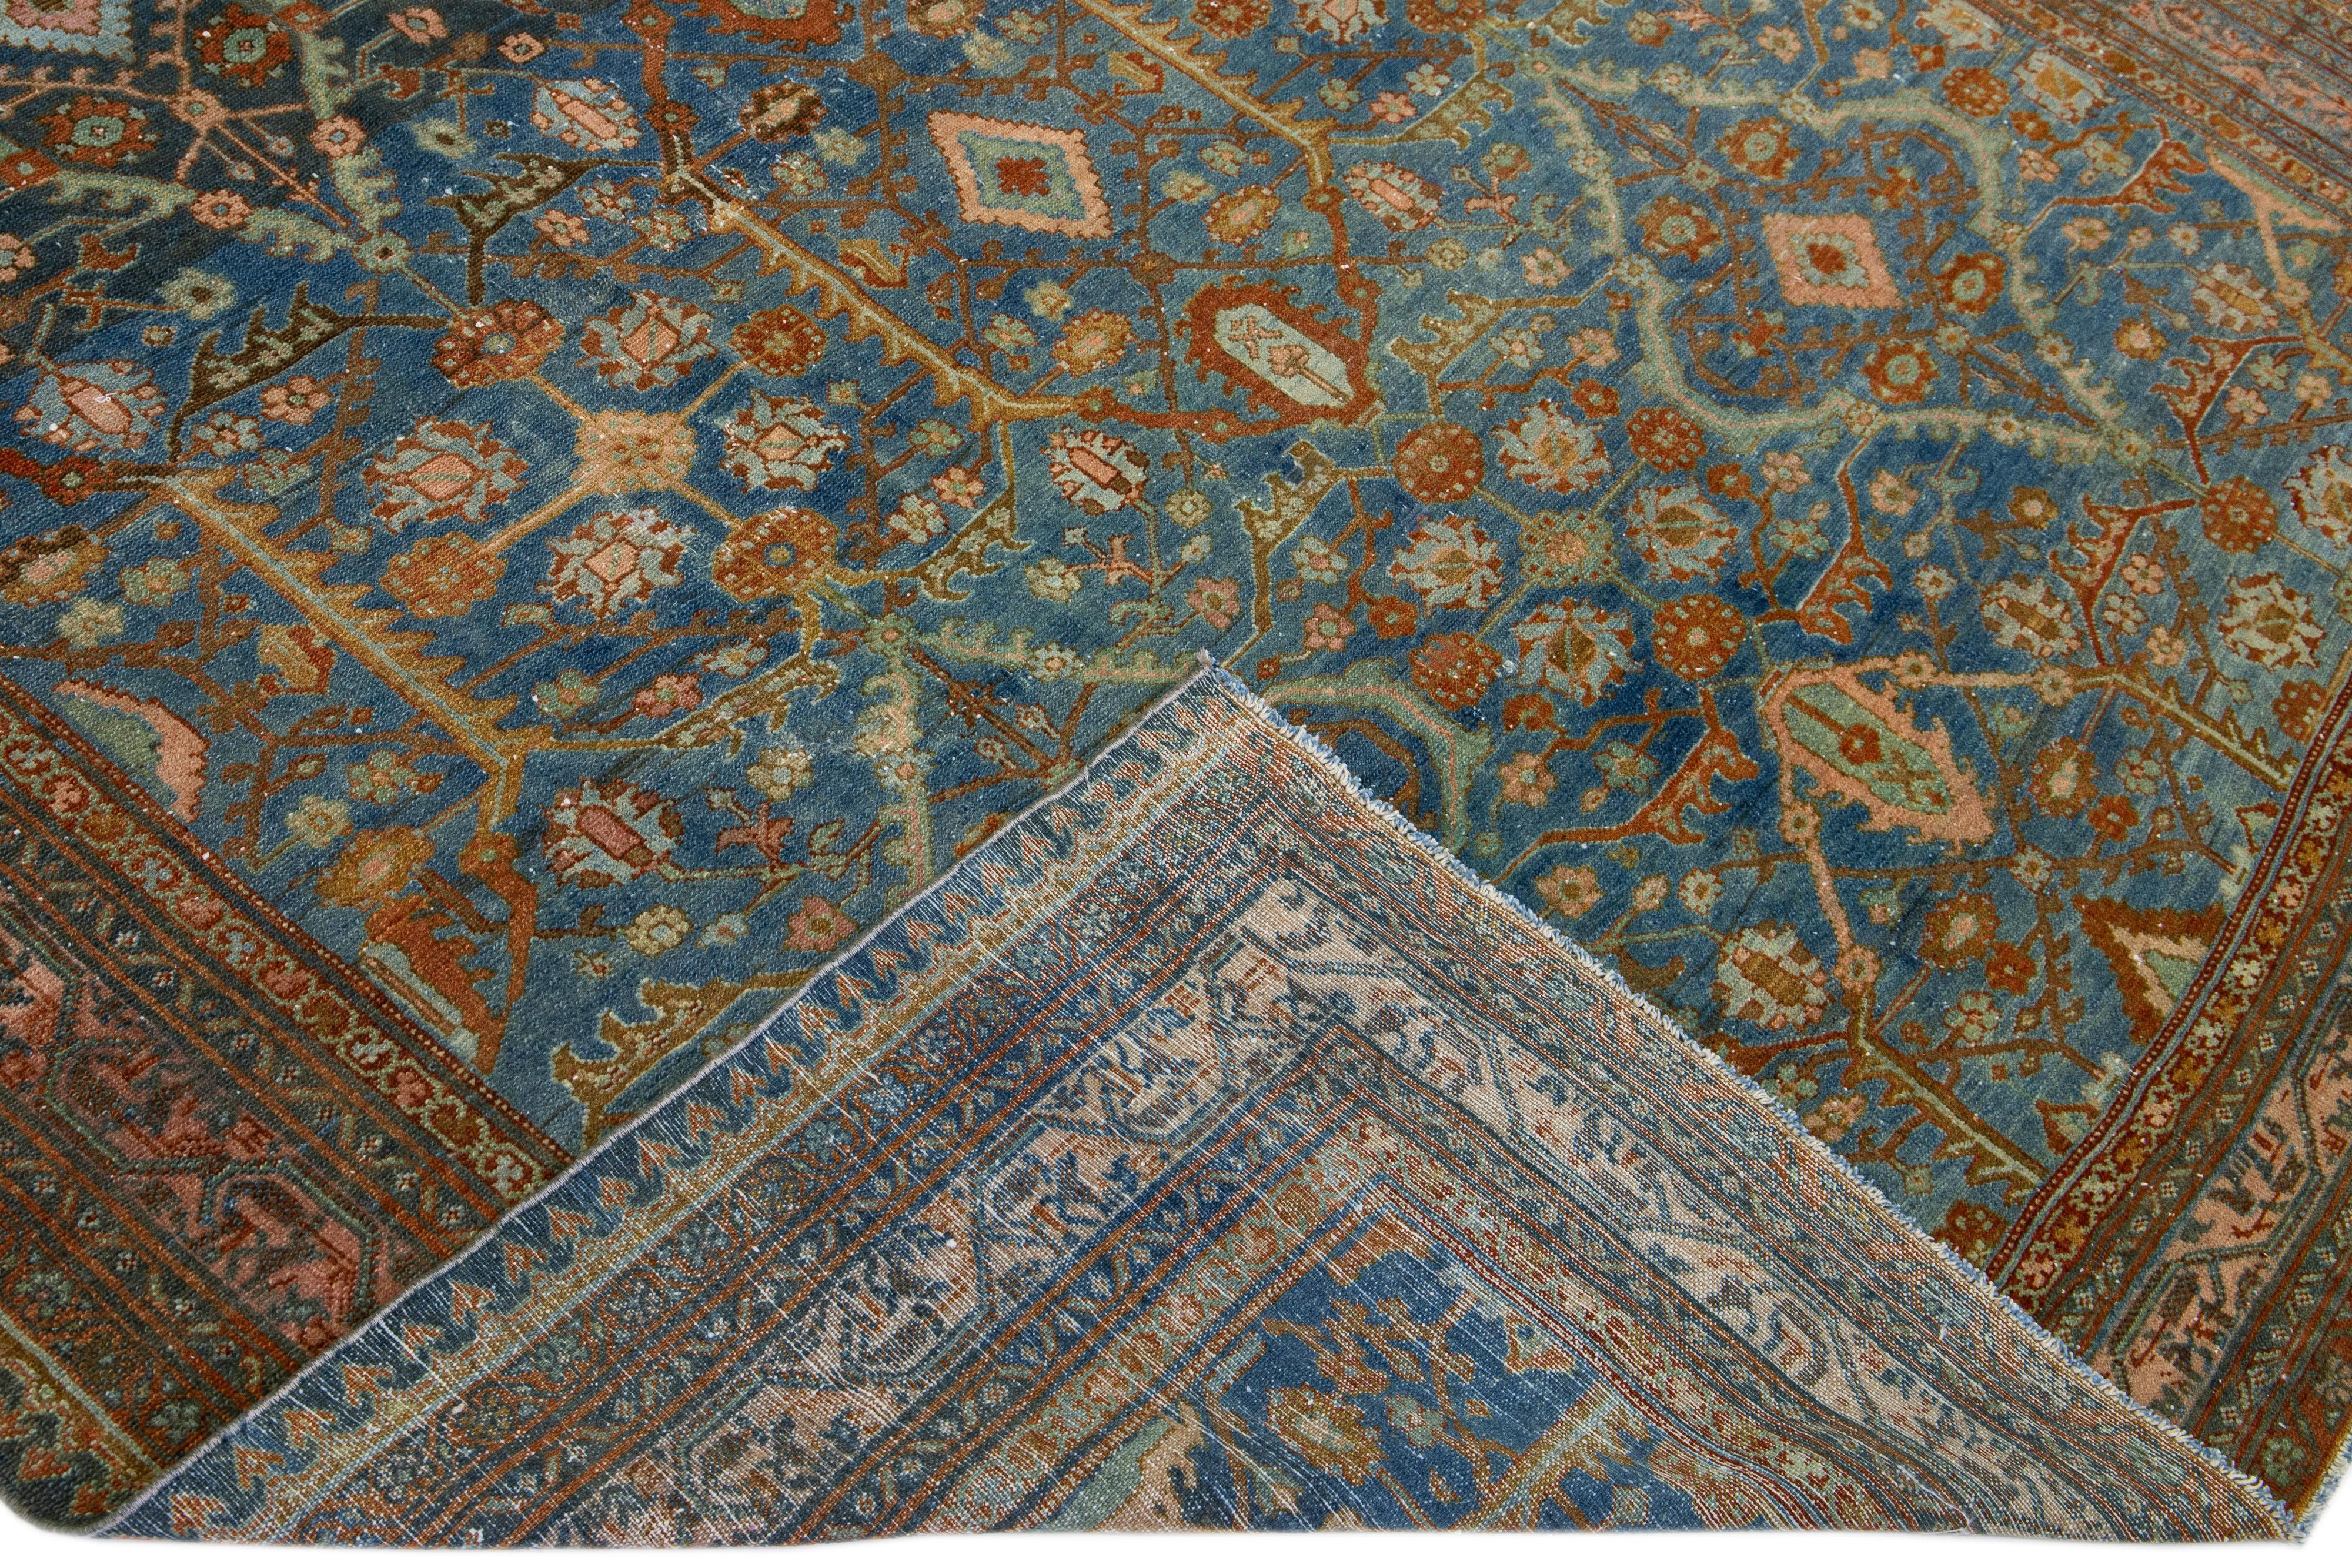 Beautiful vintage Hamadan hand-knotted wool runner with a blue field. This Persian rug has a peach frame and accents of rust in an all-over gorgeous geometric floral pattern design.

This rug measures: 7' 2